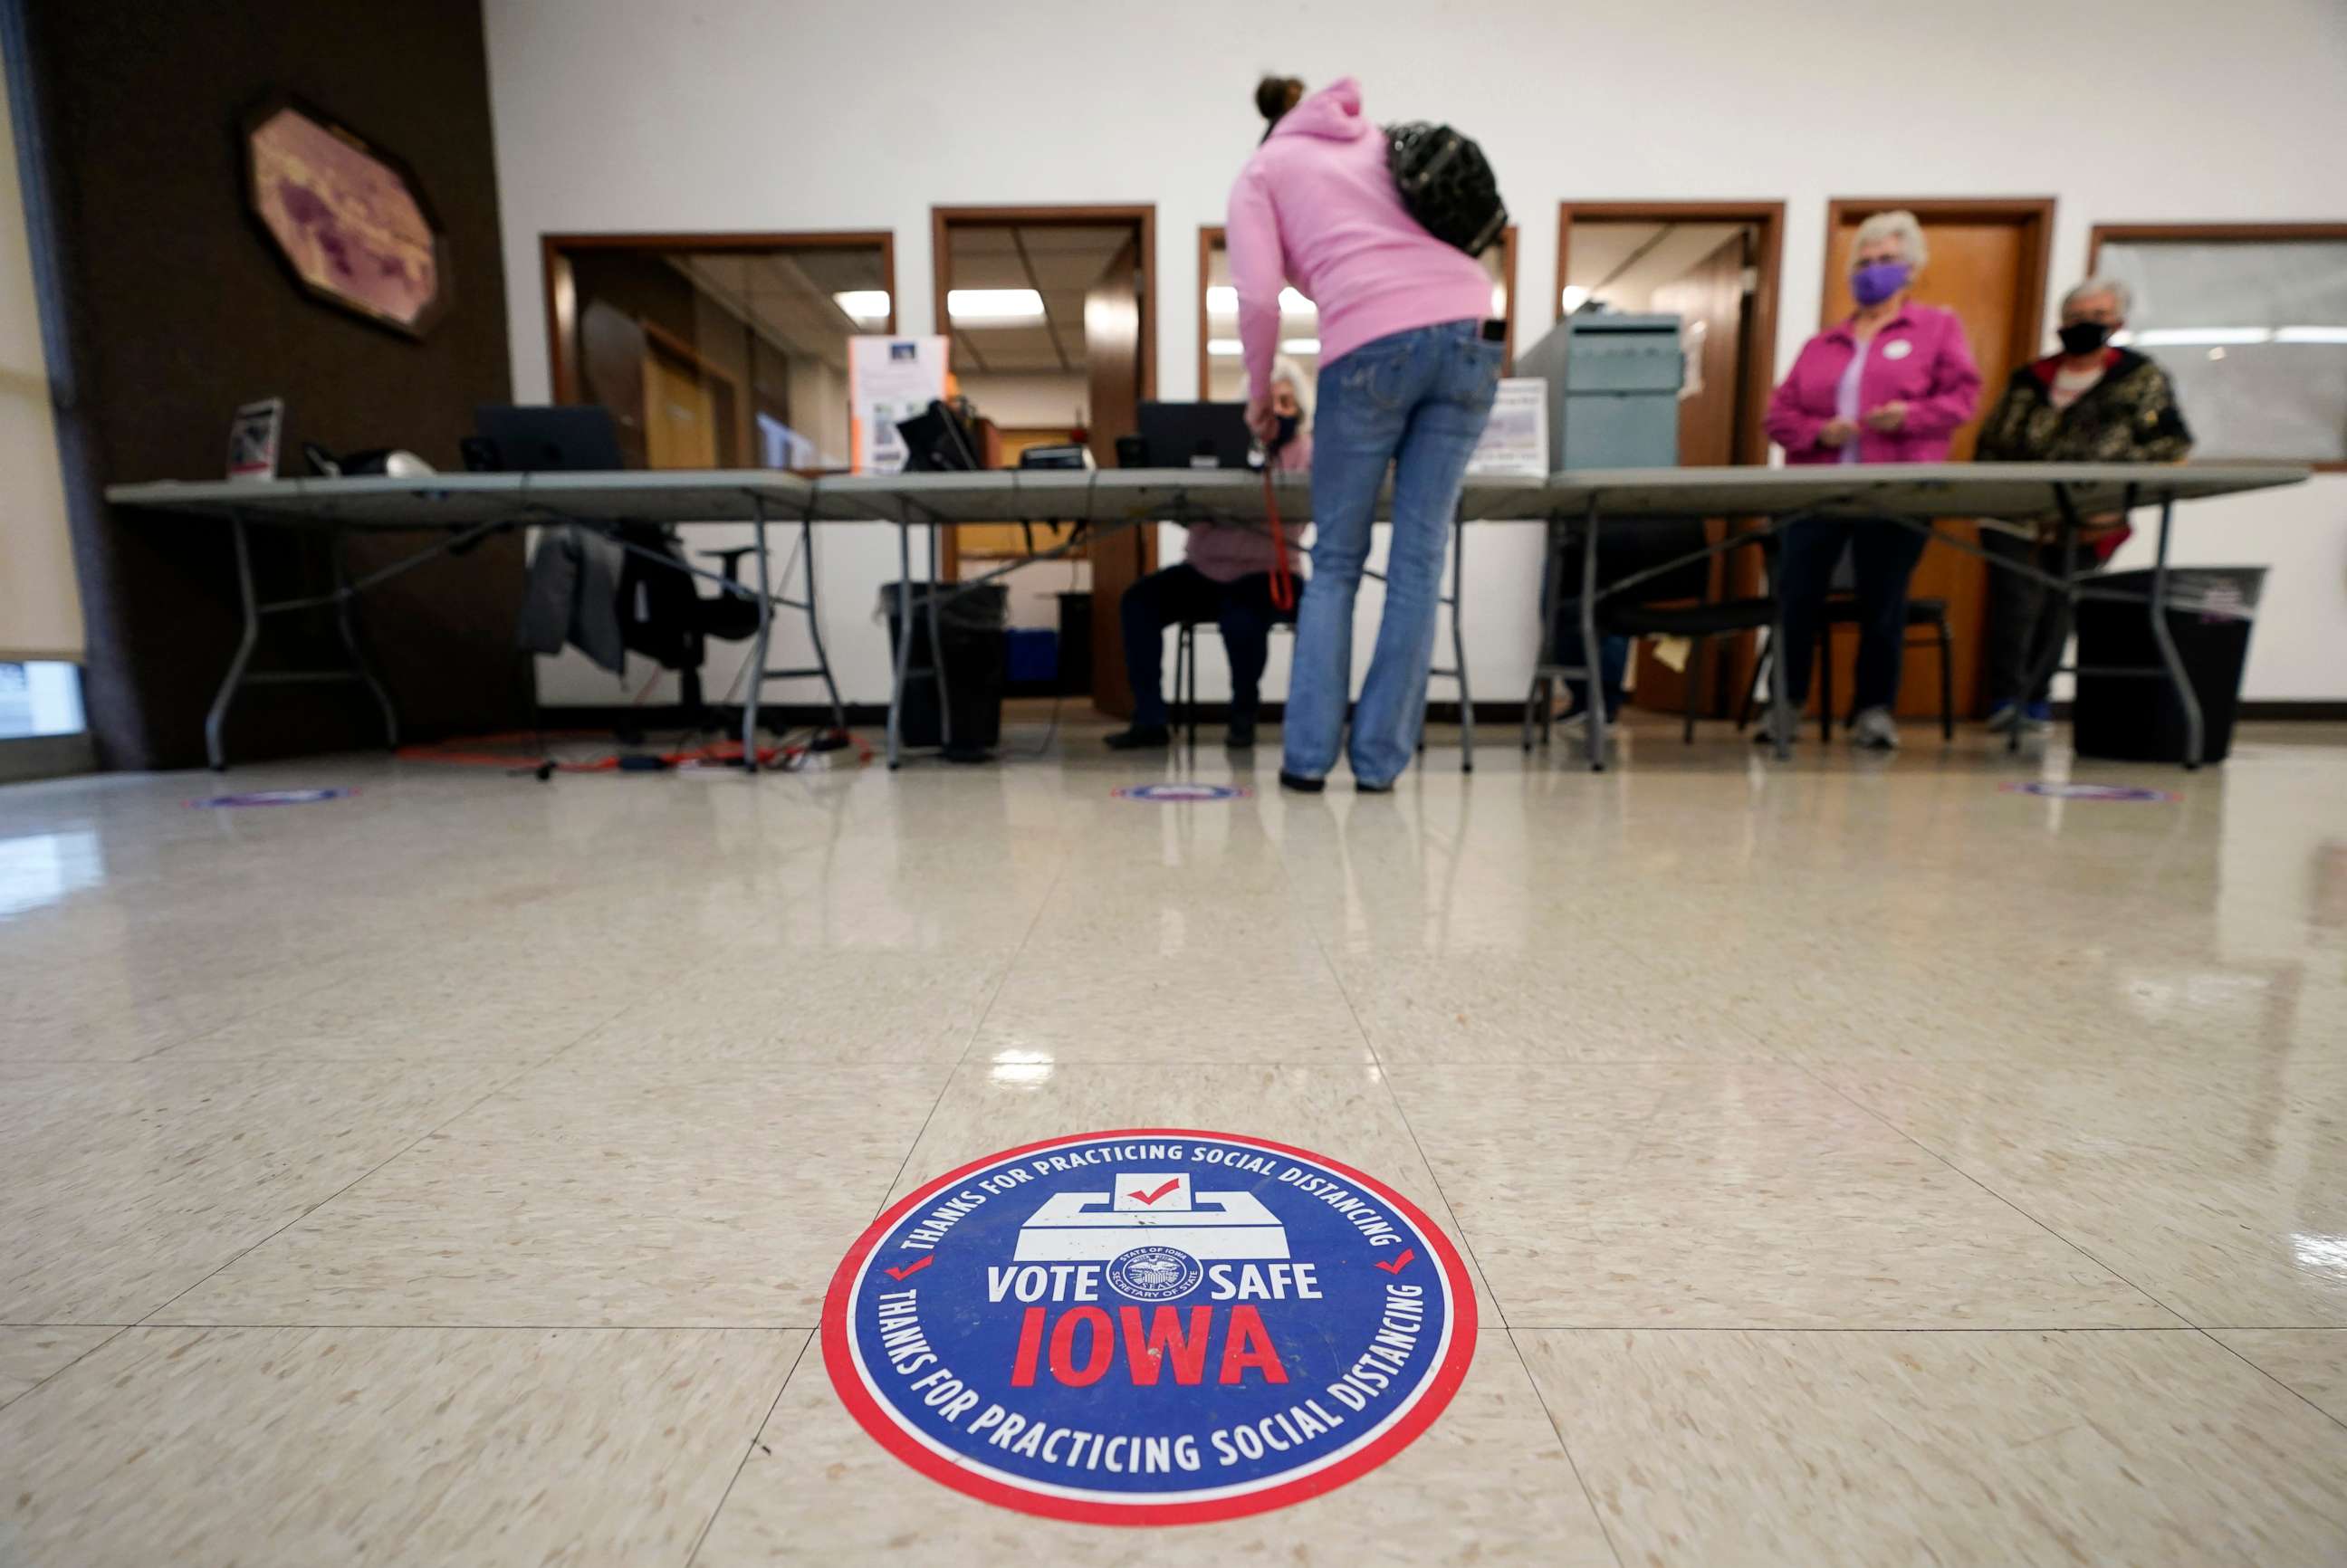 PHOTO: A local resident gets her ballot during early voting, Oct. 20, 2020, in Adel, Iowa.